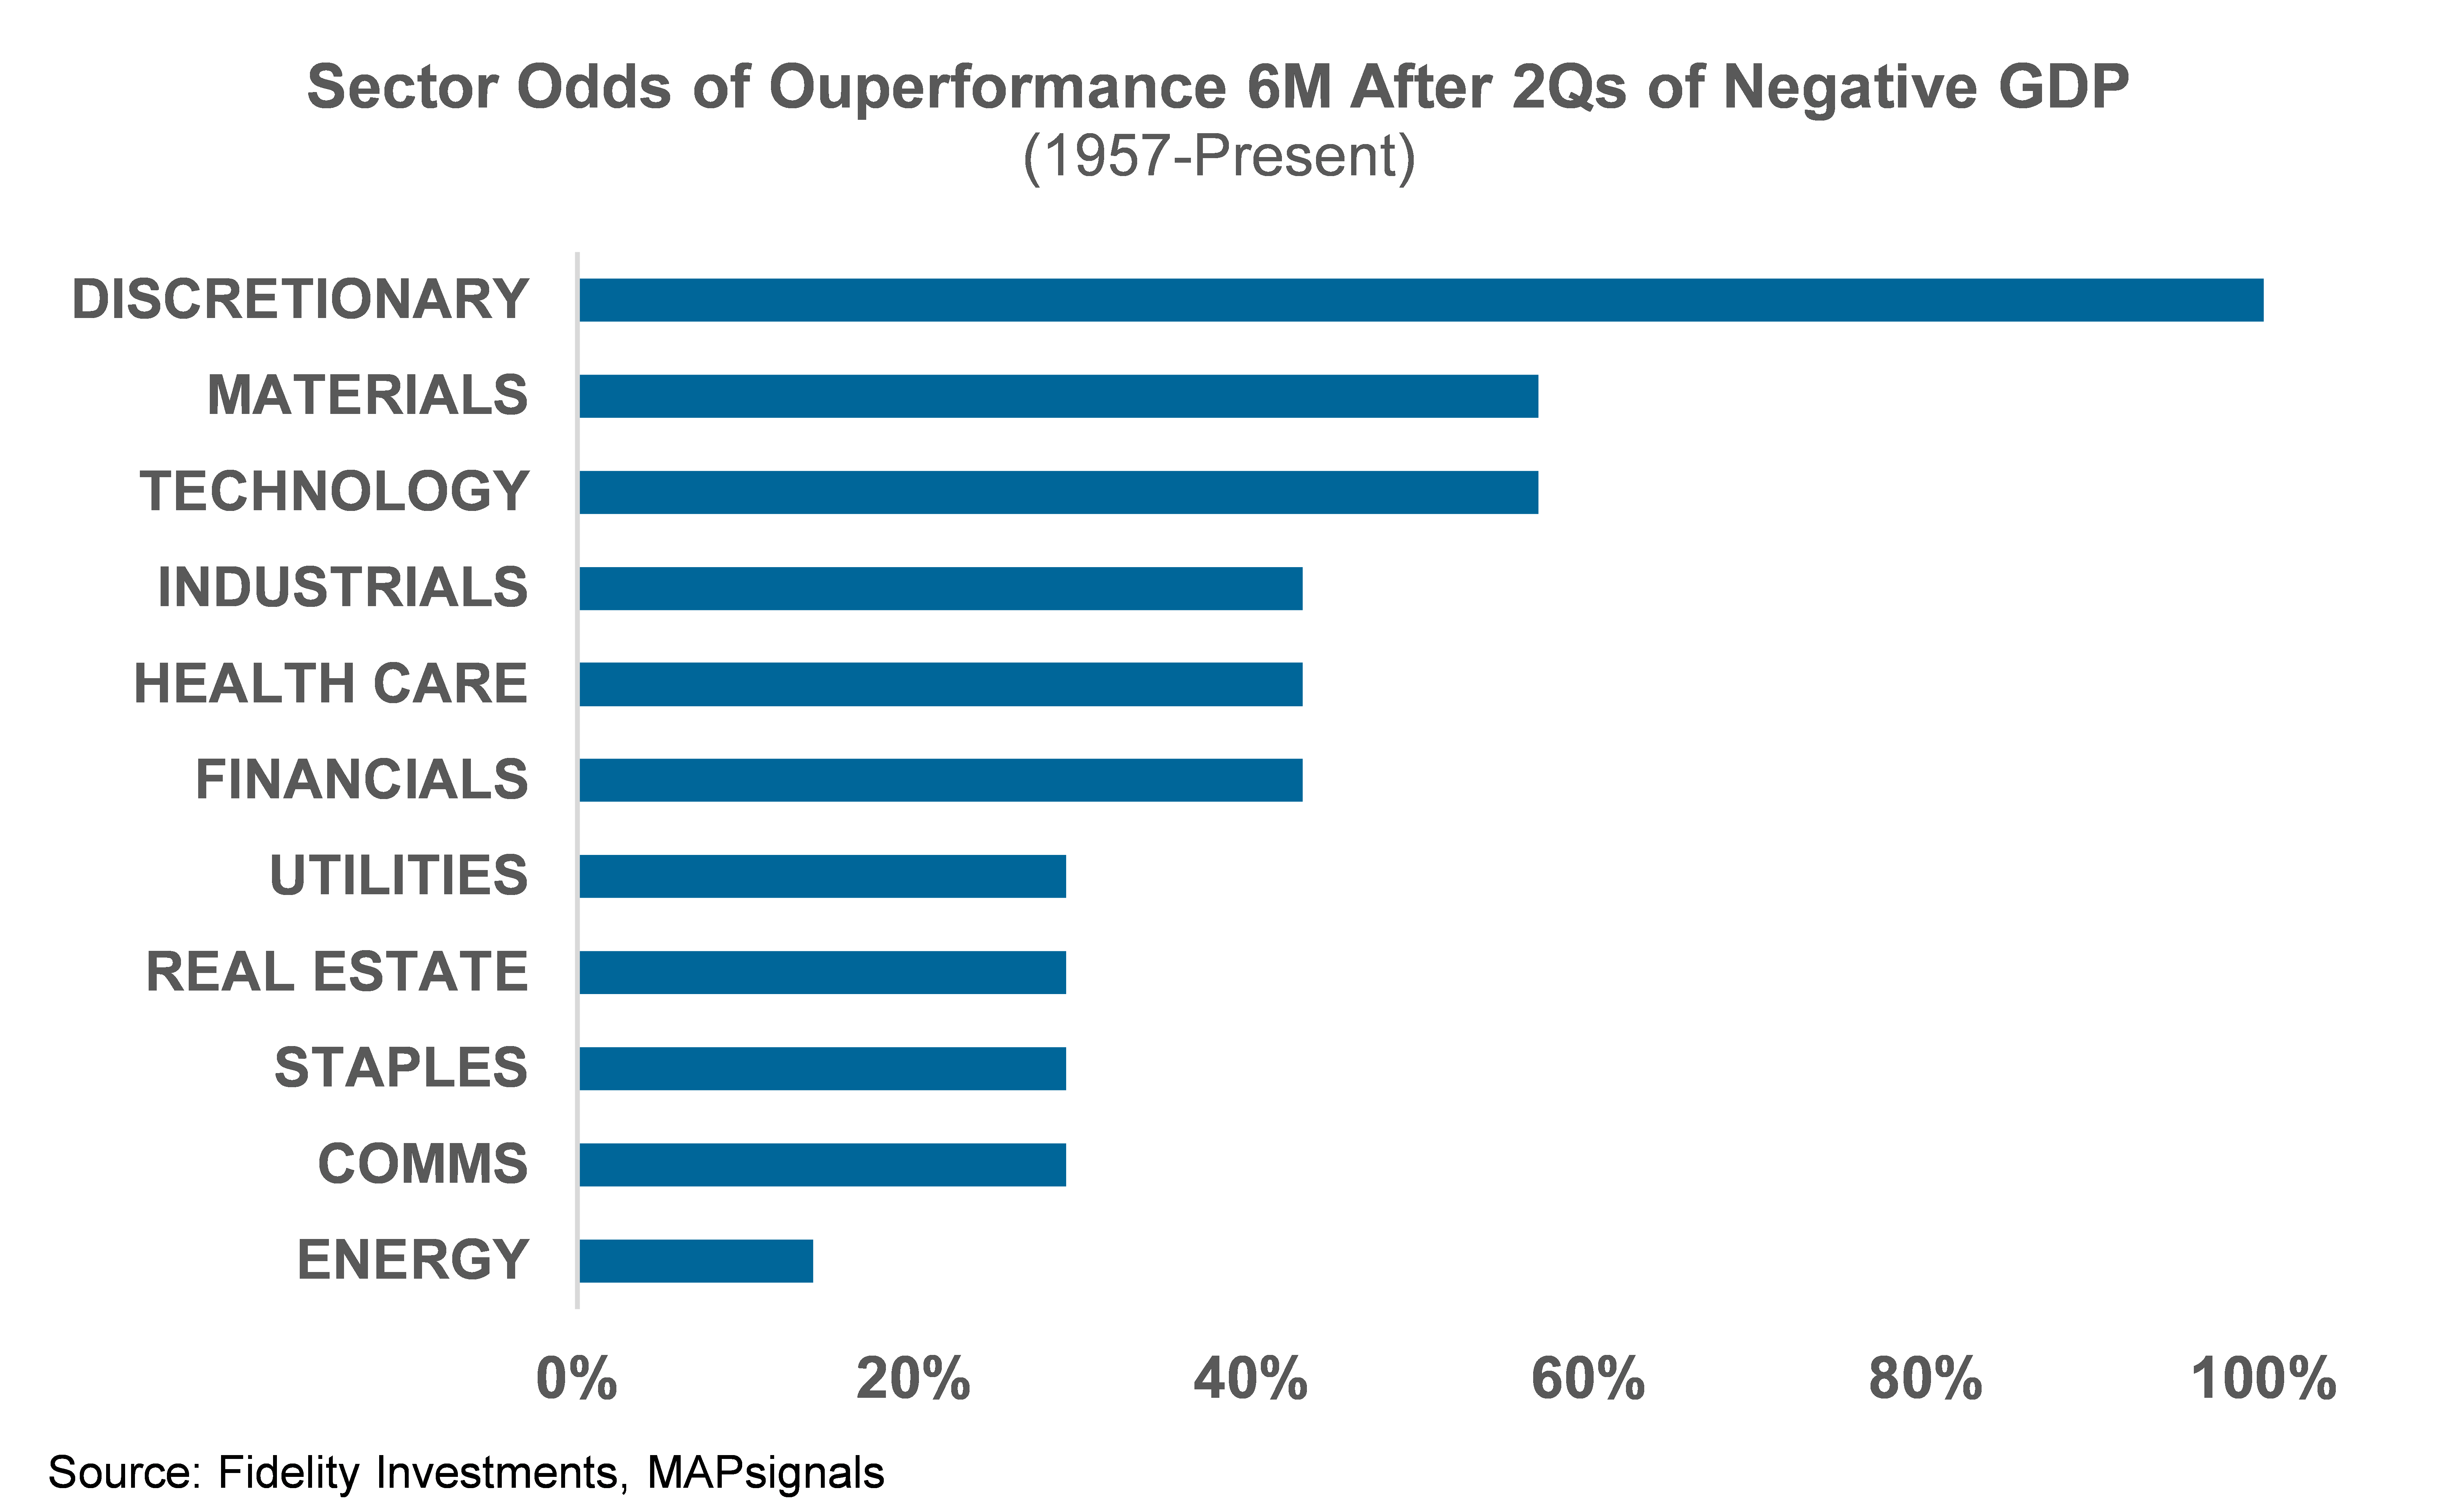 Sector Odds of Outperformance 6-months after 2Qs of negative GDP